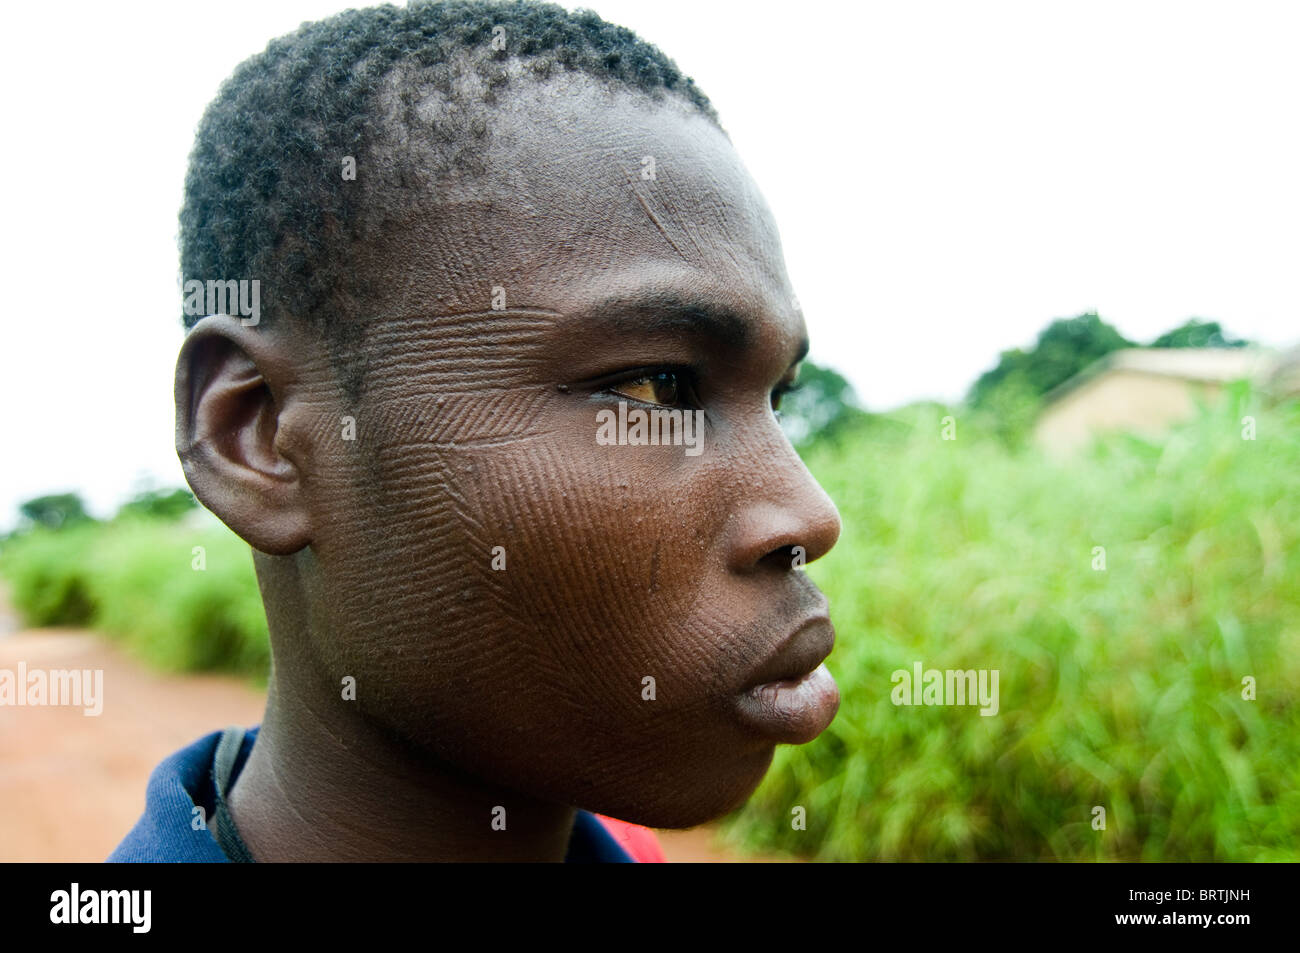 Portrait of a Somba man. The Somba people scar their faces with many tiny linear scars. Stock Photo